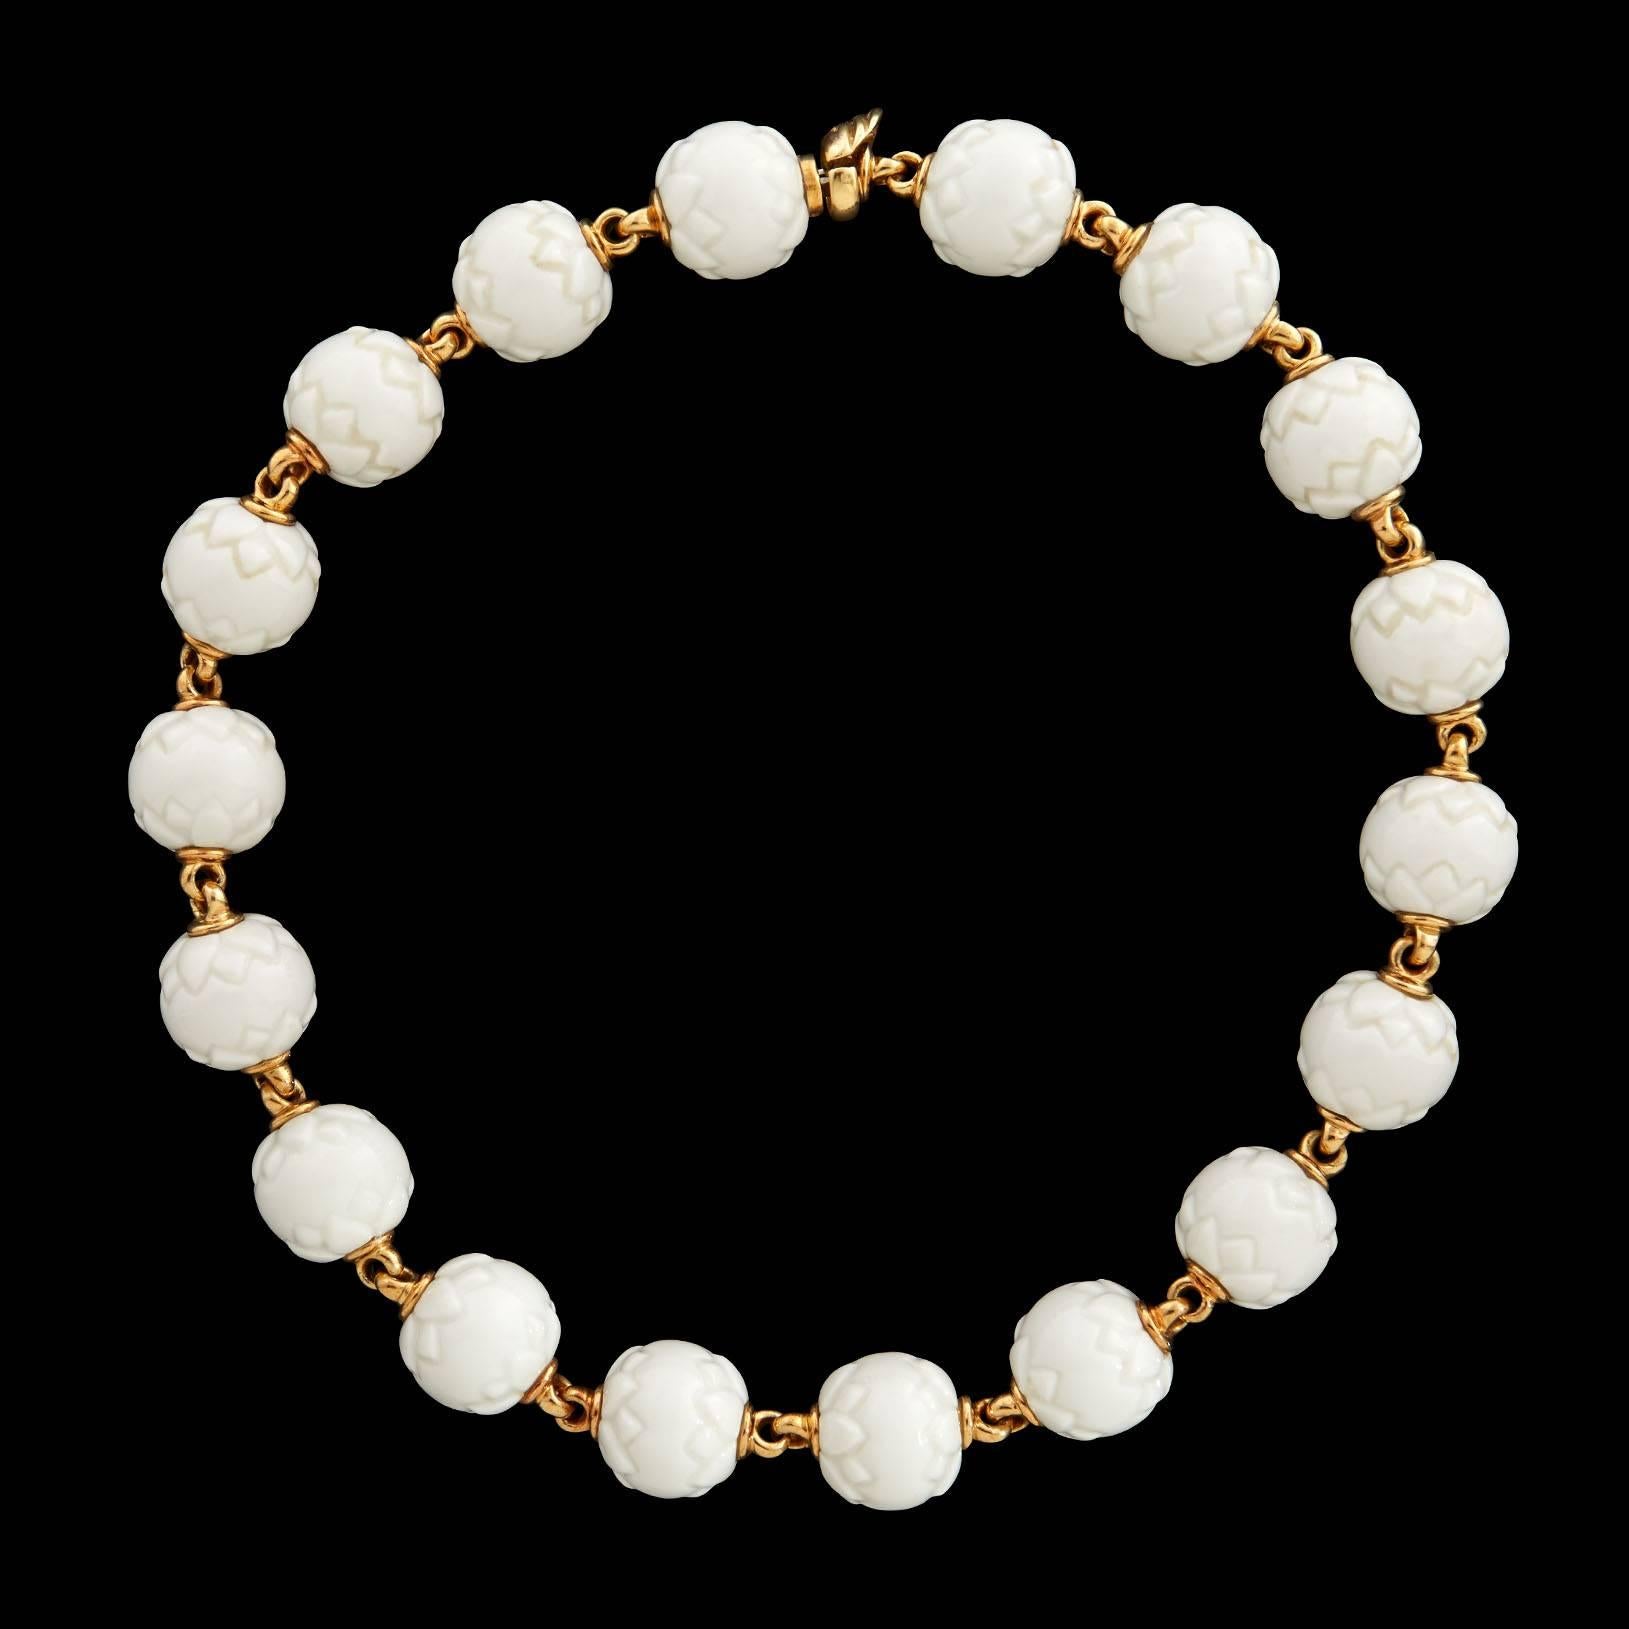 Bulgari Porcelain and 18Kt Yellow Gold Necklace from the Chandra Collection. This piece measures approximately 16.5 inches long and each bead has a 16.5mm diameter. The total weight is 113.6 grams.